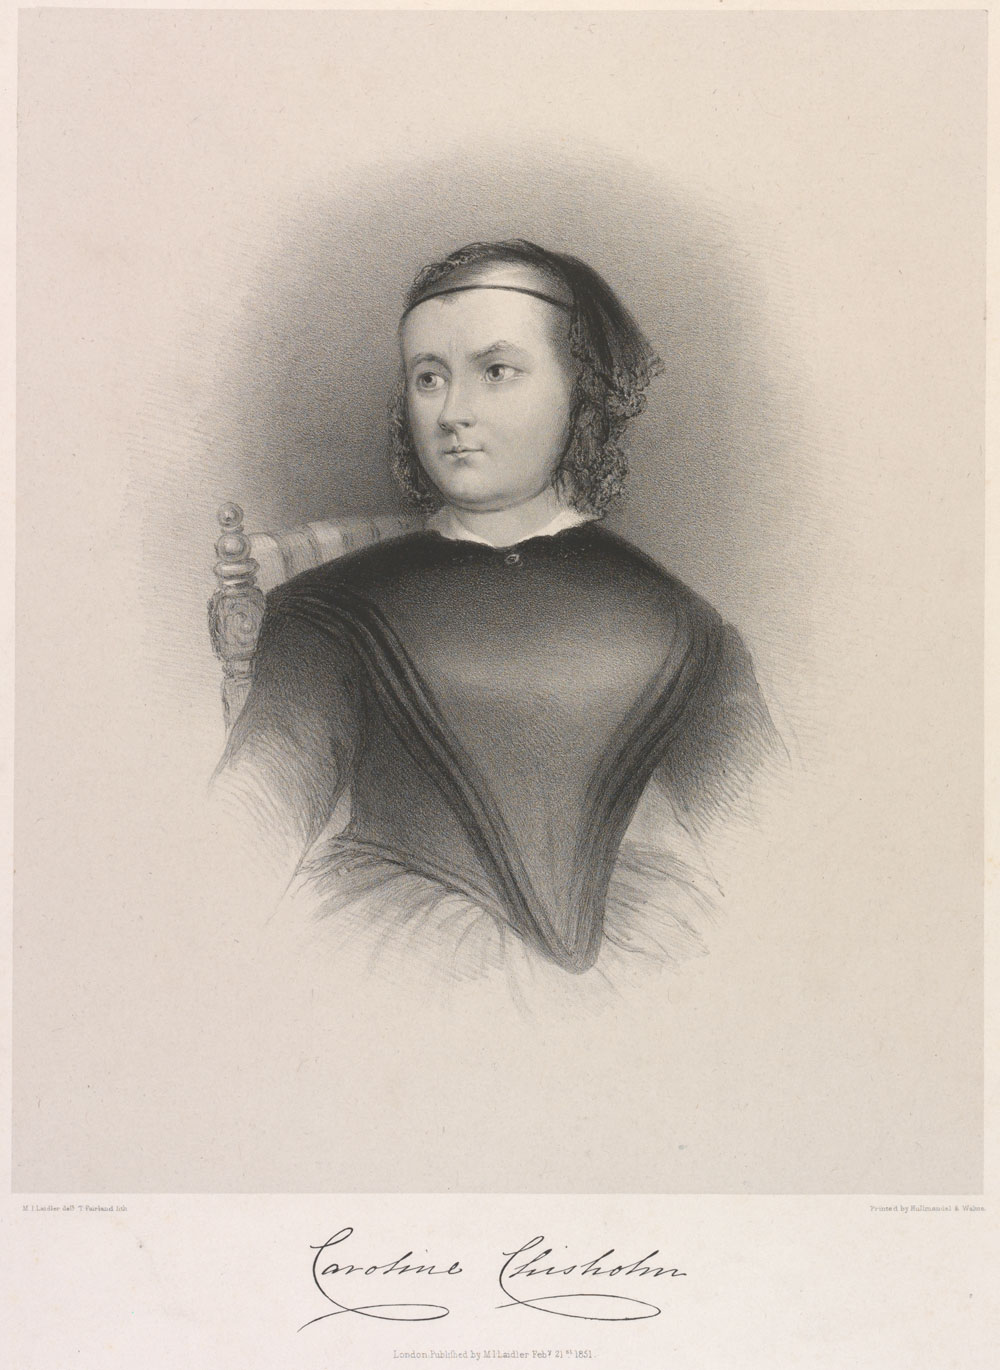 Image 1 of 5 - A lithograph of Caroline Chisholm sitting in a chair showing her head and torso only